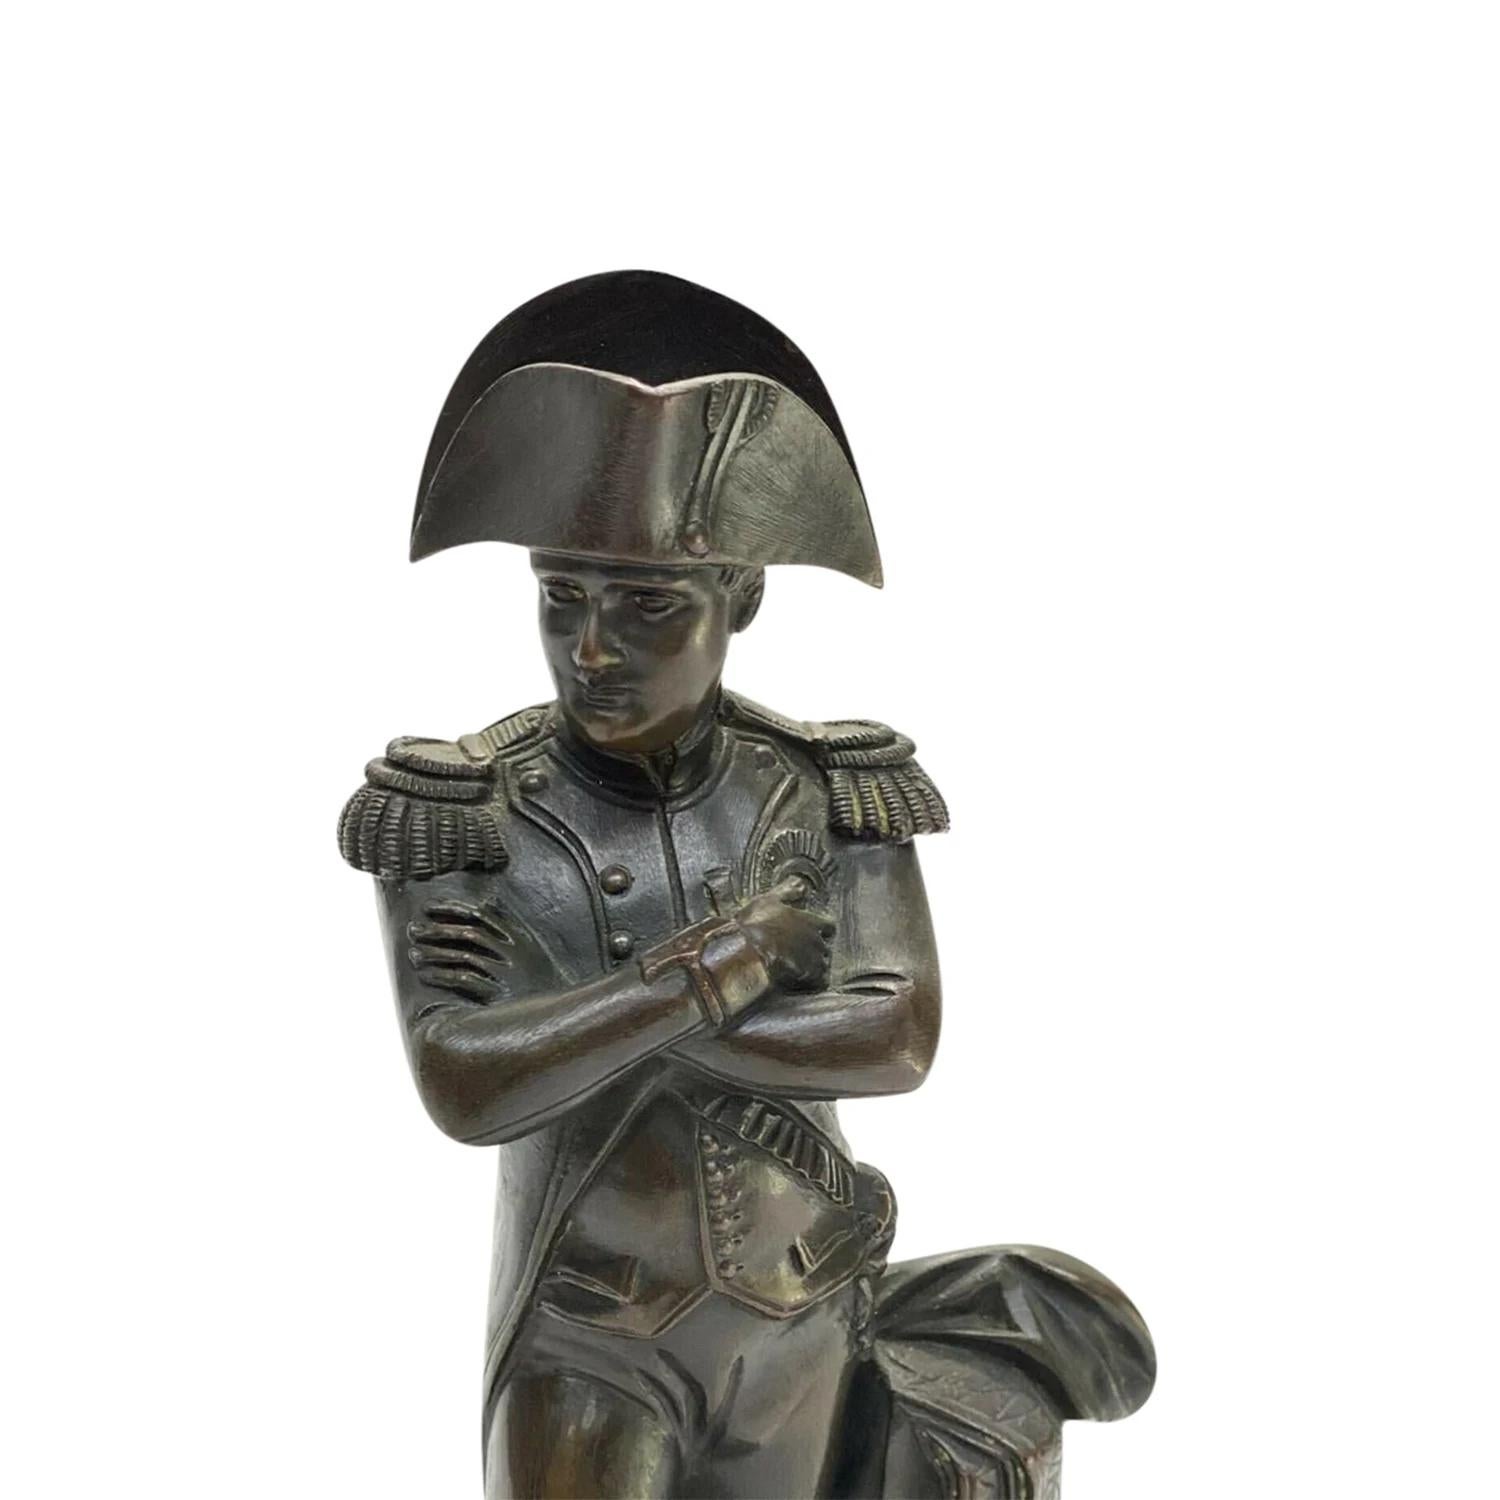 A 19th Century, black antique French bust of Napoleon Bonaparte made of hand crafted patinated bronze, in good condition. The small sculpture depicts Napoleon in his military outfit and in a commanding stance. The detailed Parisian décor piece